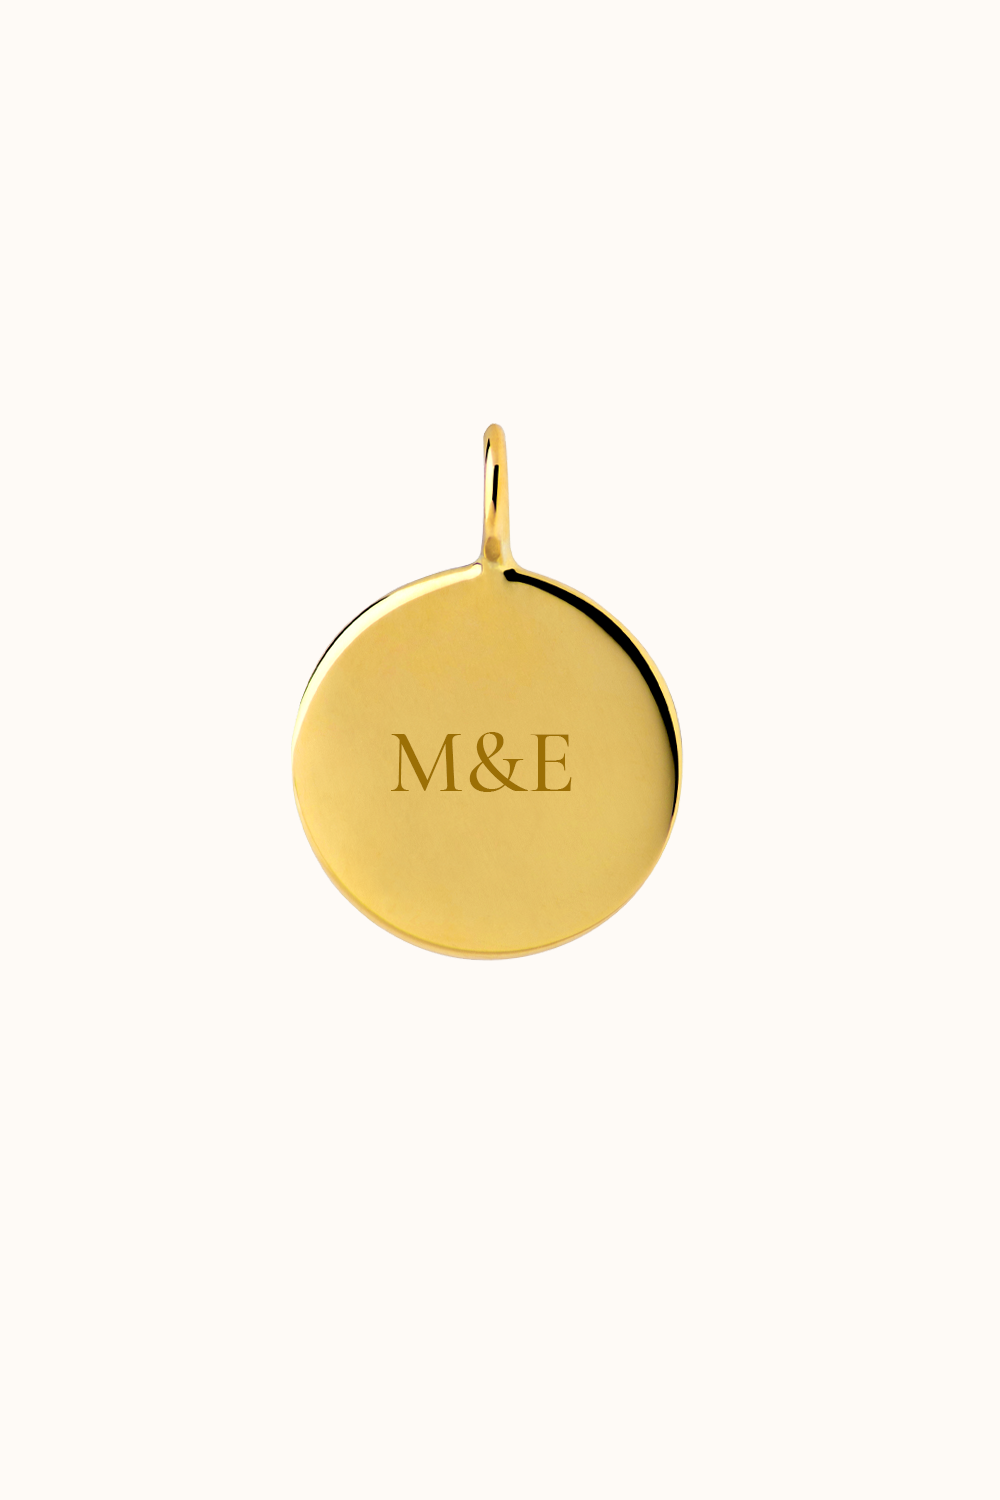 The Fine Gold Coin Charm